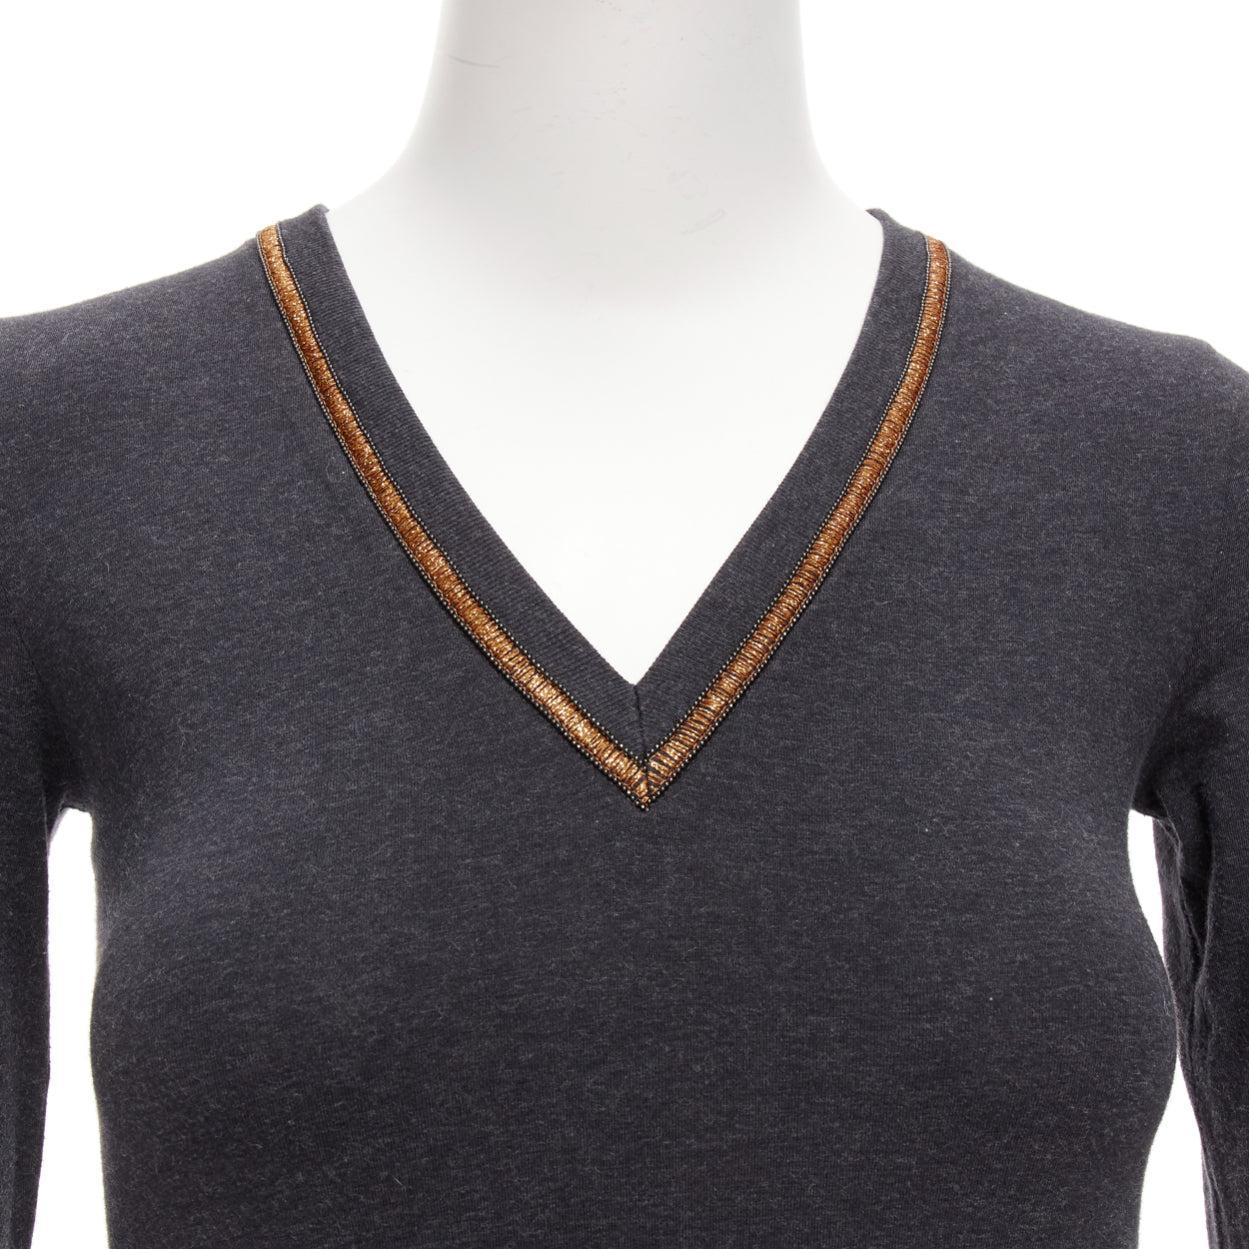 BRUNELLO CUCINELLI grey cotton blend gold foil v neck sweater top XXS
Reference: EALU/A00010
Brand: Brunello Cucinelli
Material: Cotton, Blend
Color: Grey, Gold
Pattern: Solid
Closure: Pullover
Made in: Italy

CONDITION:
Condition: Excellent, this